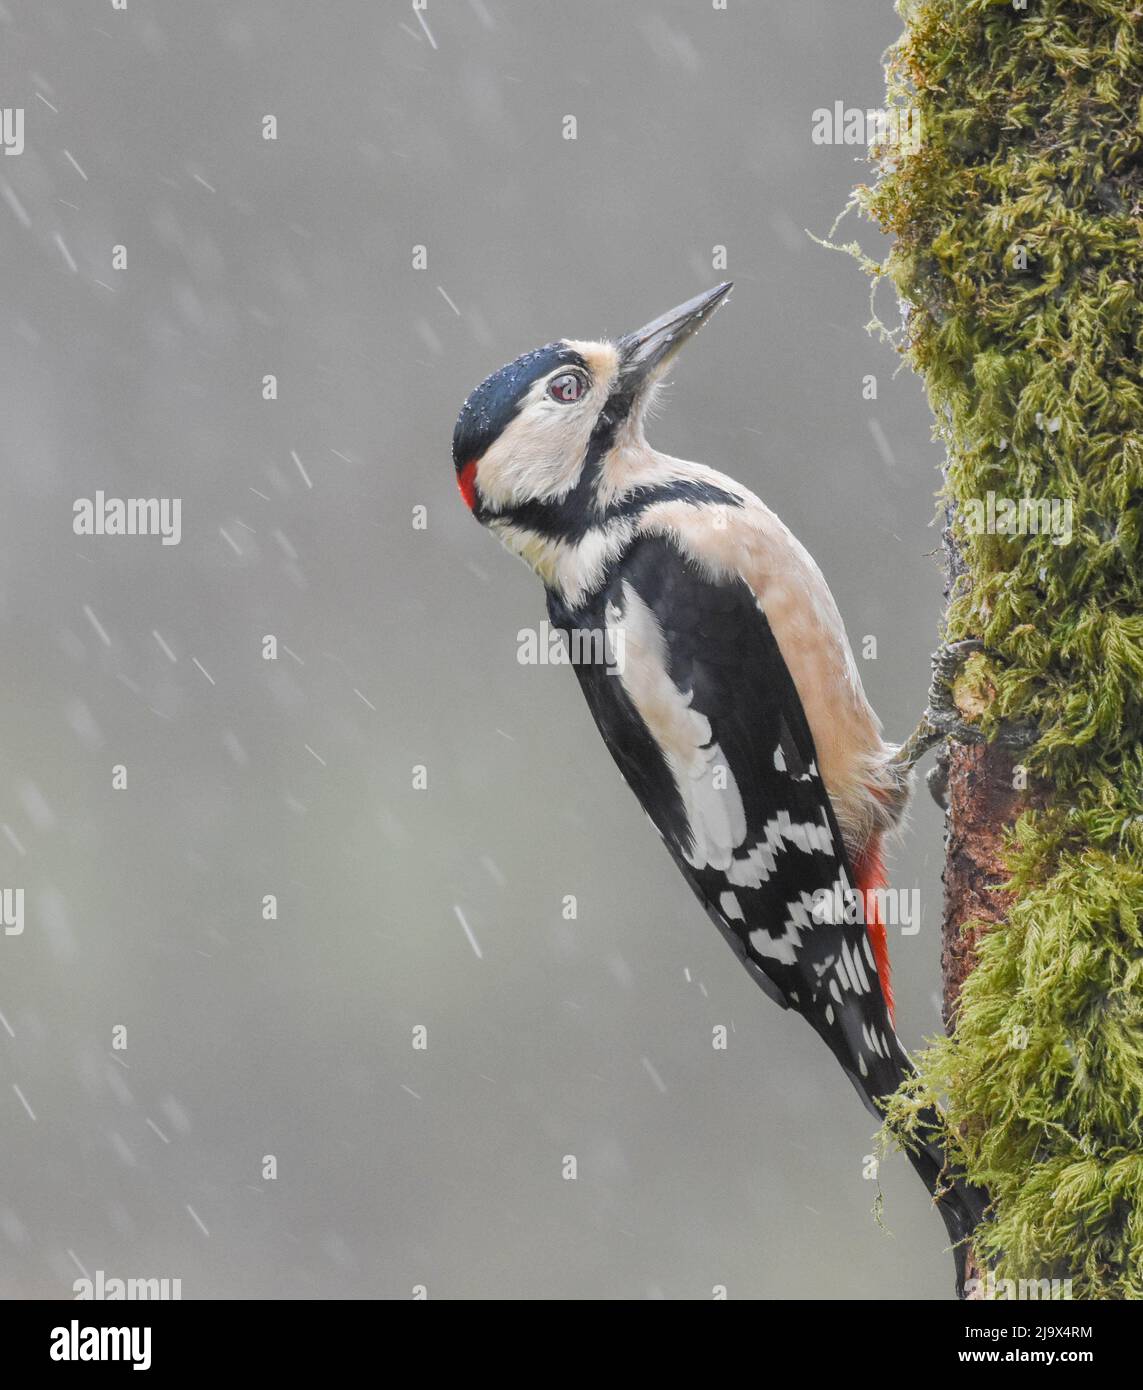 Male Great Spotted Woodpecker in the rain. Scotland, UK. Dendrocopos major Stock Photo